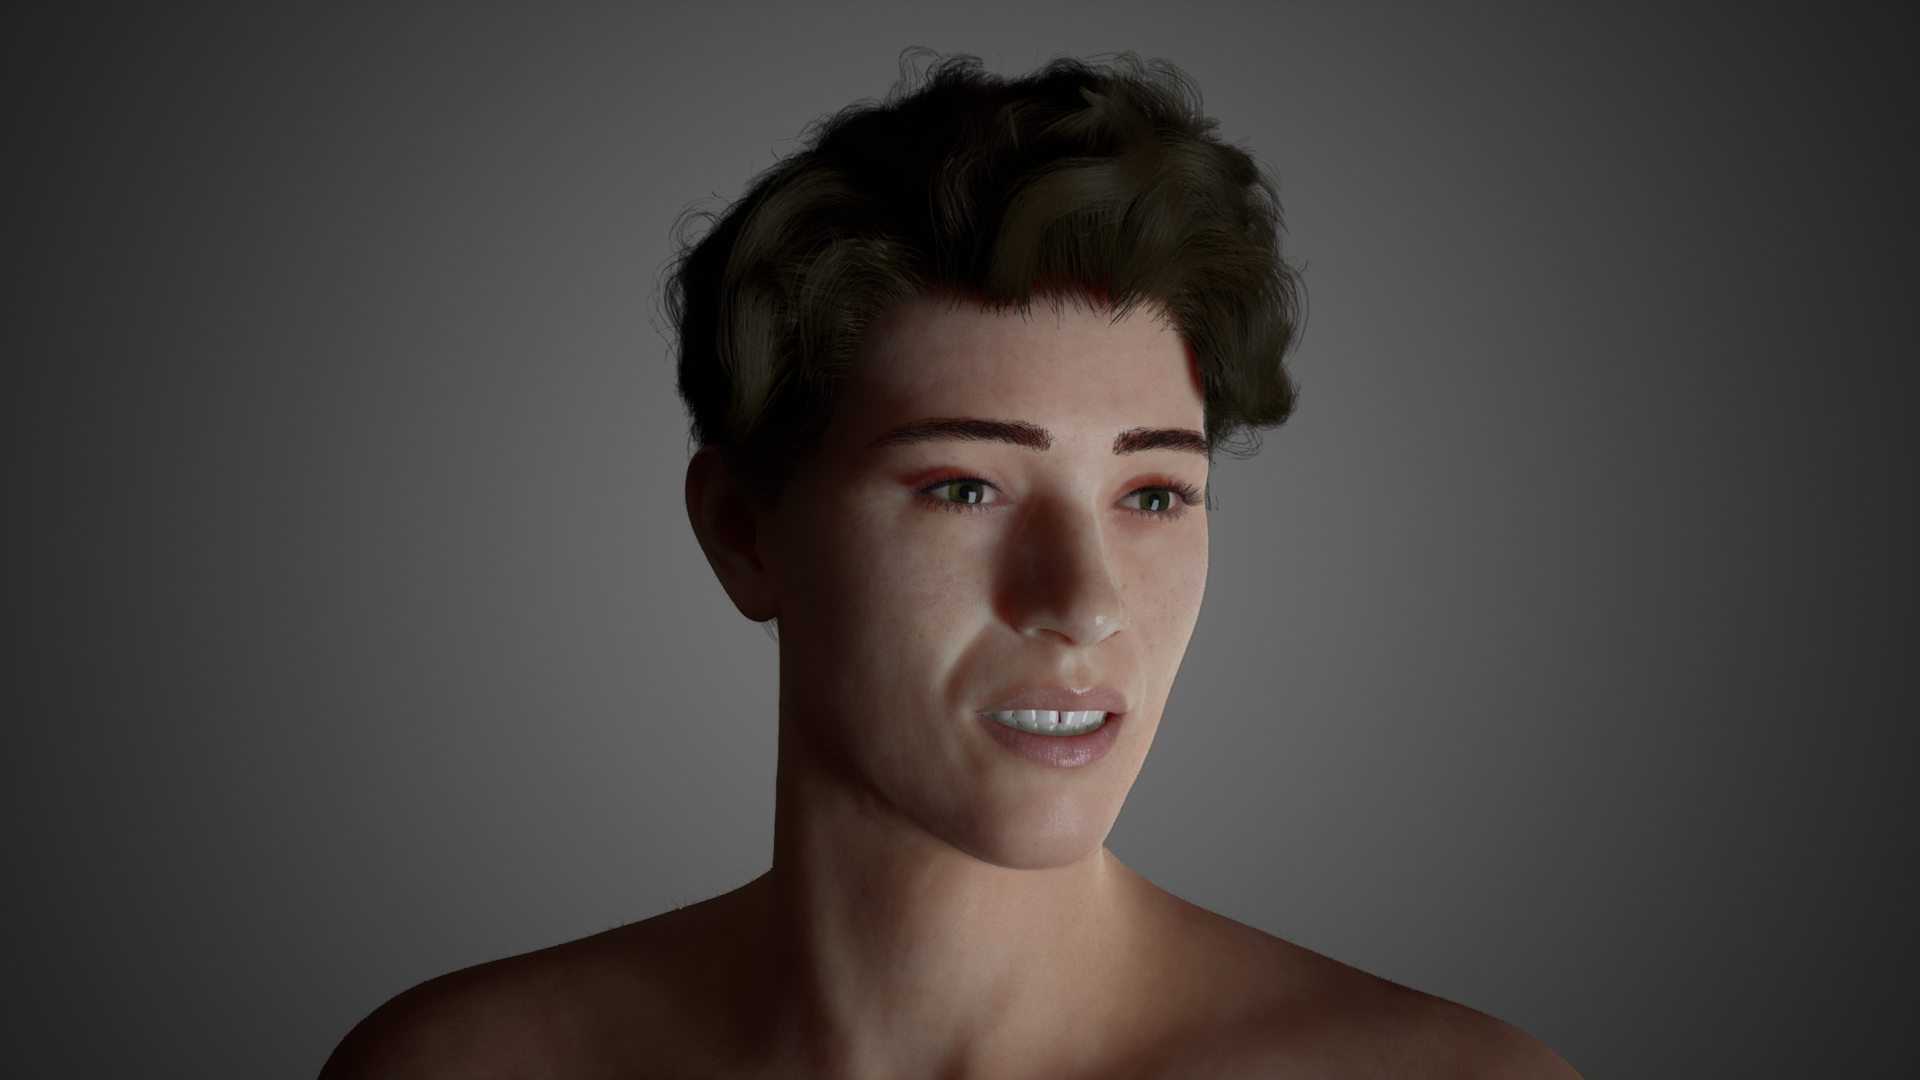 In-game footage of a Male character with fully customizable teeth created inside our character creation tool.